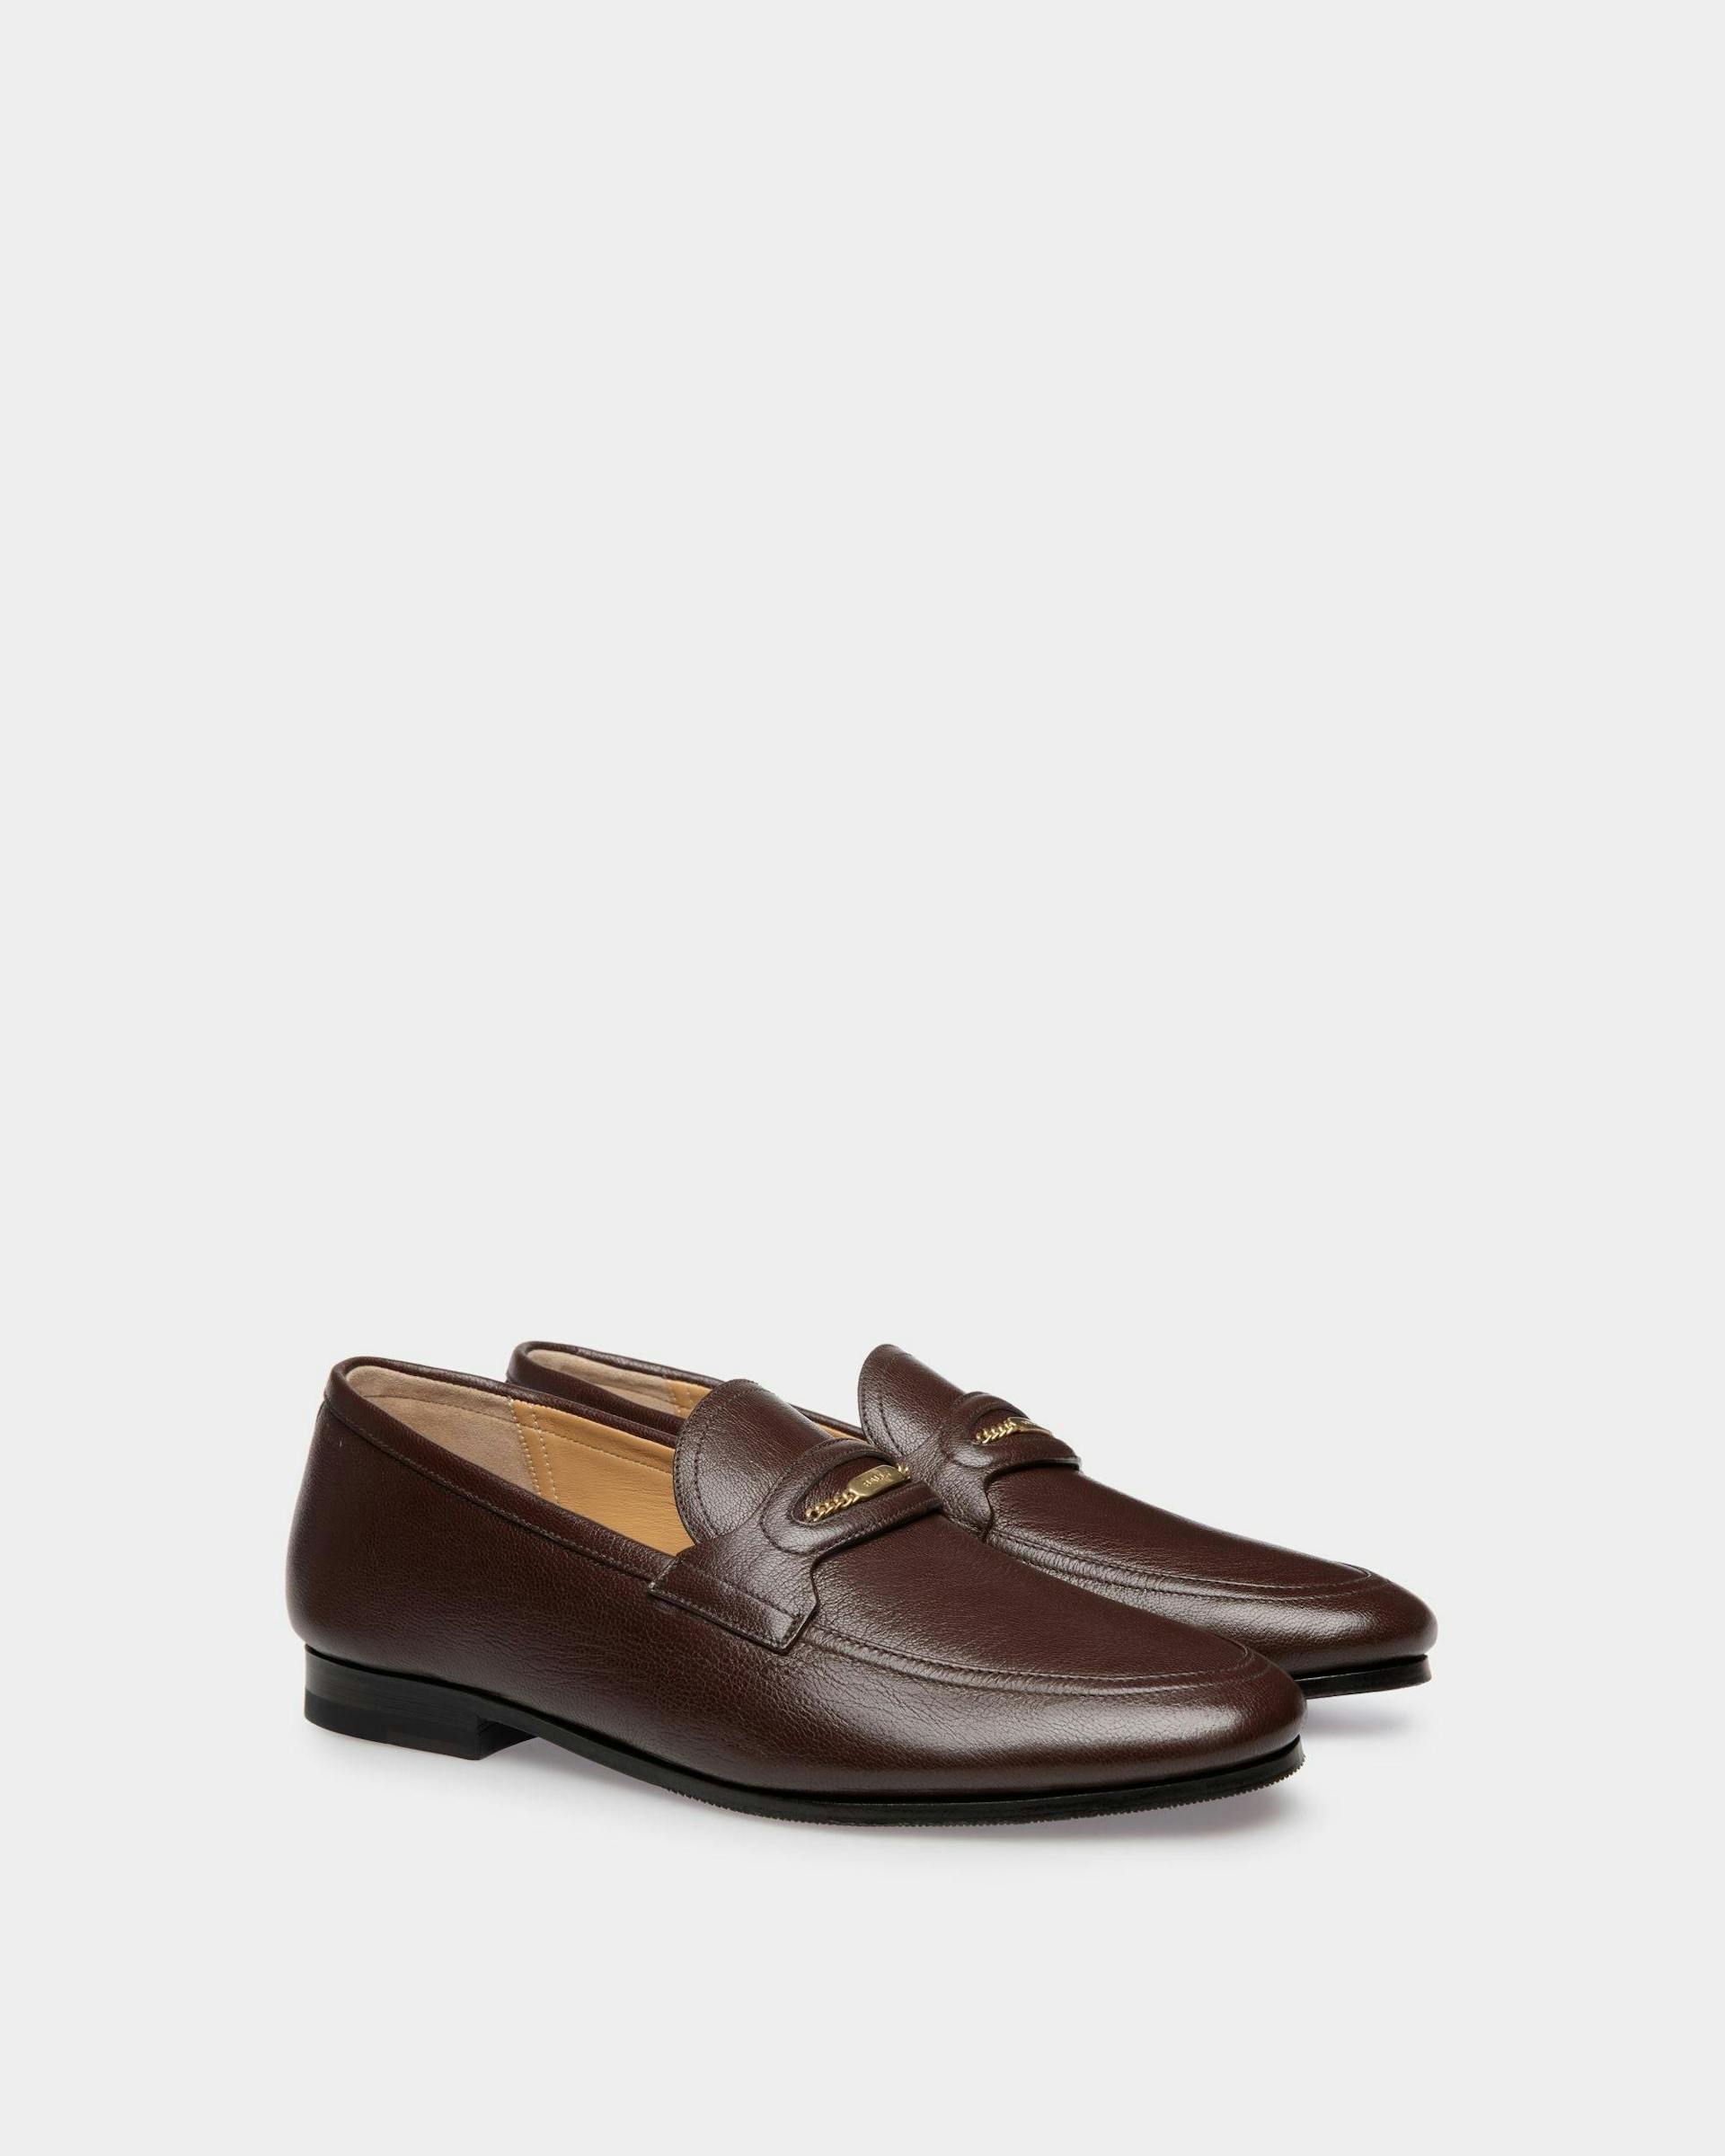 Men's Plume Loafer in Brown Grained Leather | Bally | Still Life 3/4 Back